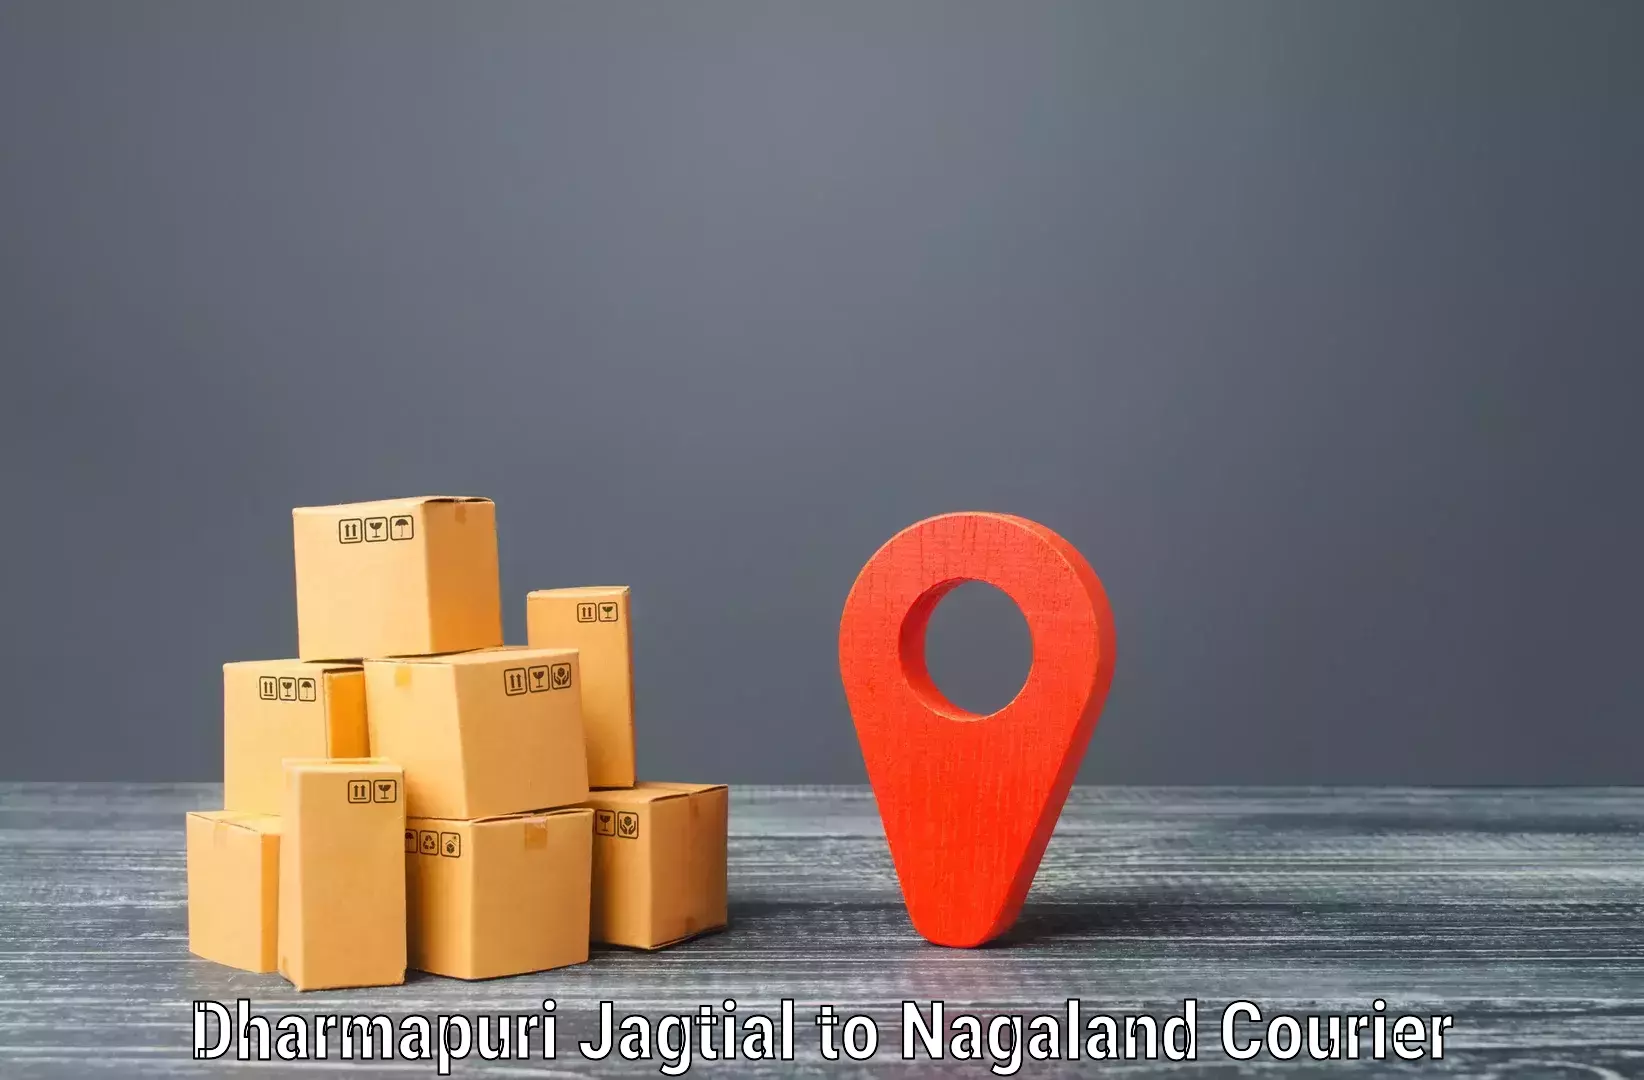 Parcel delivery automation Dharmapuri Jagtial to NIT Nagaland